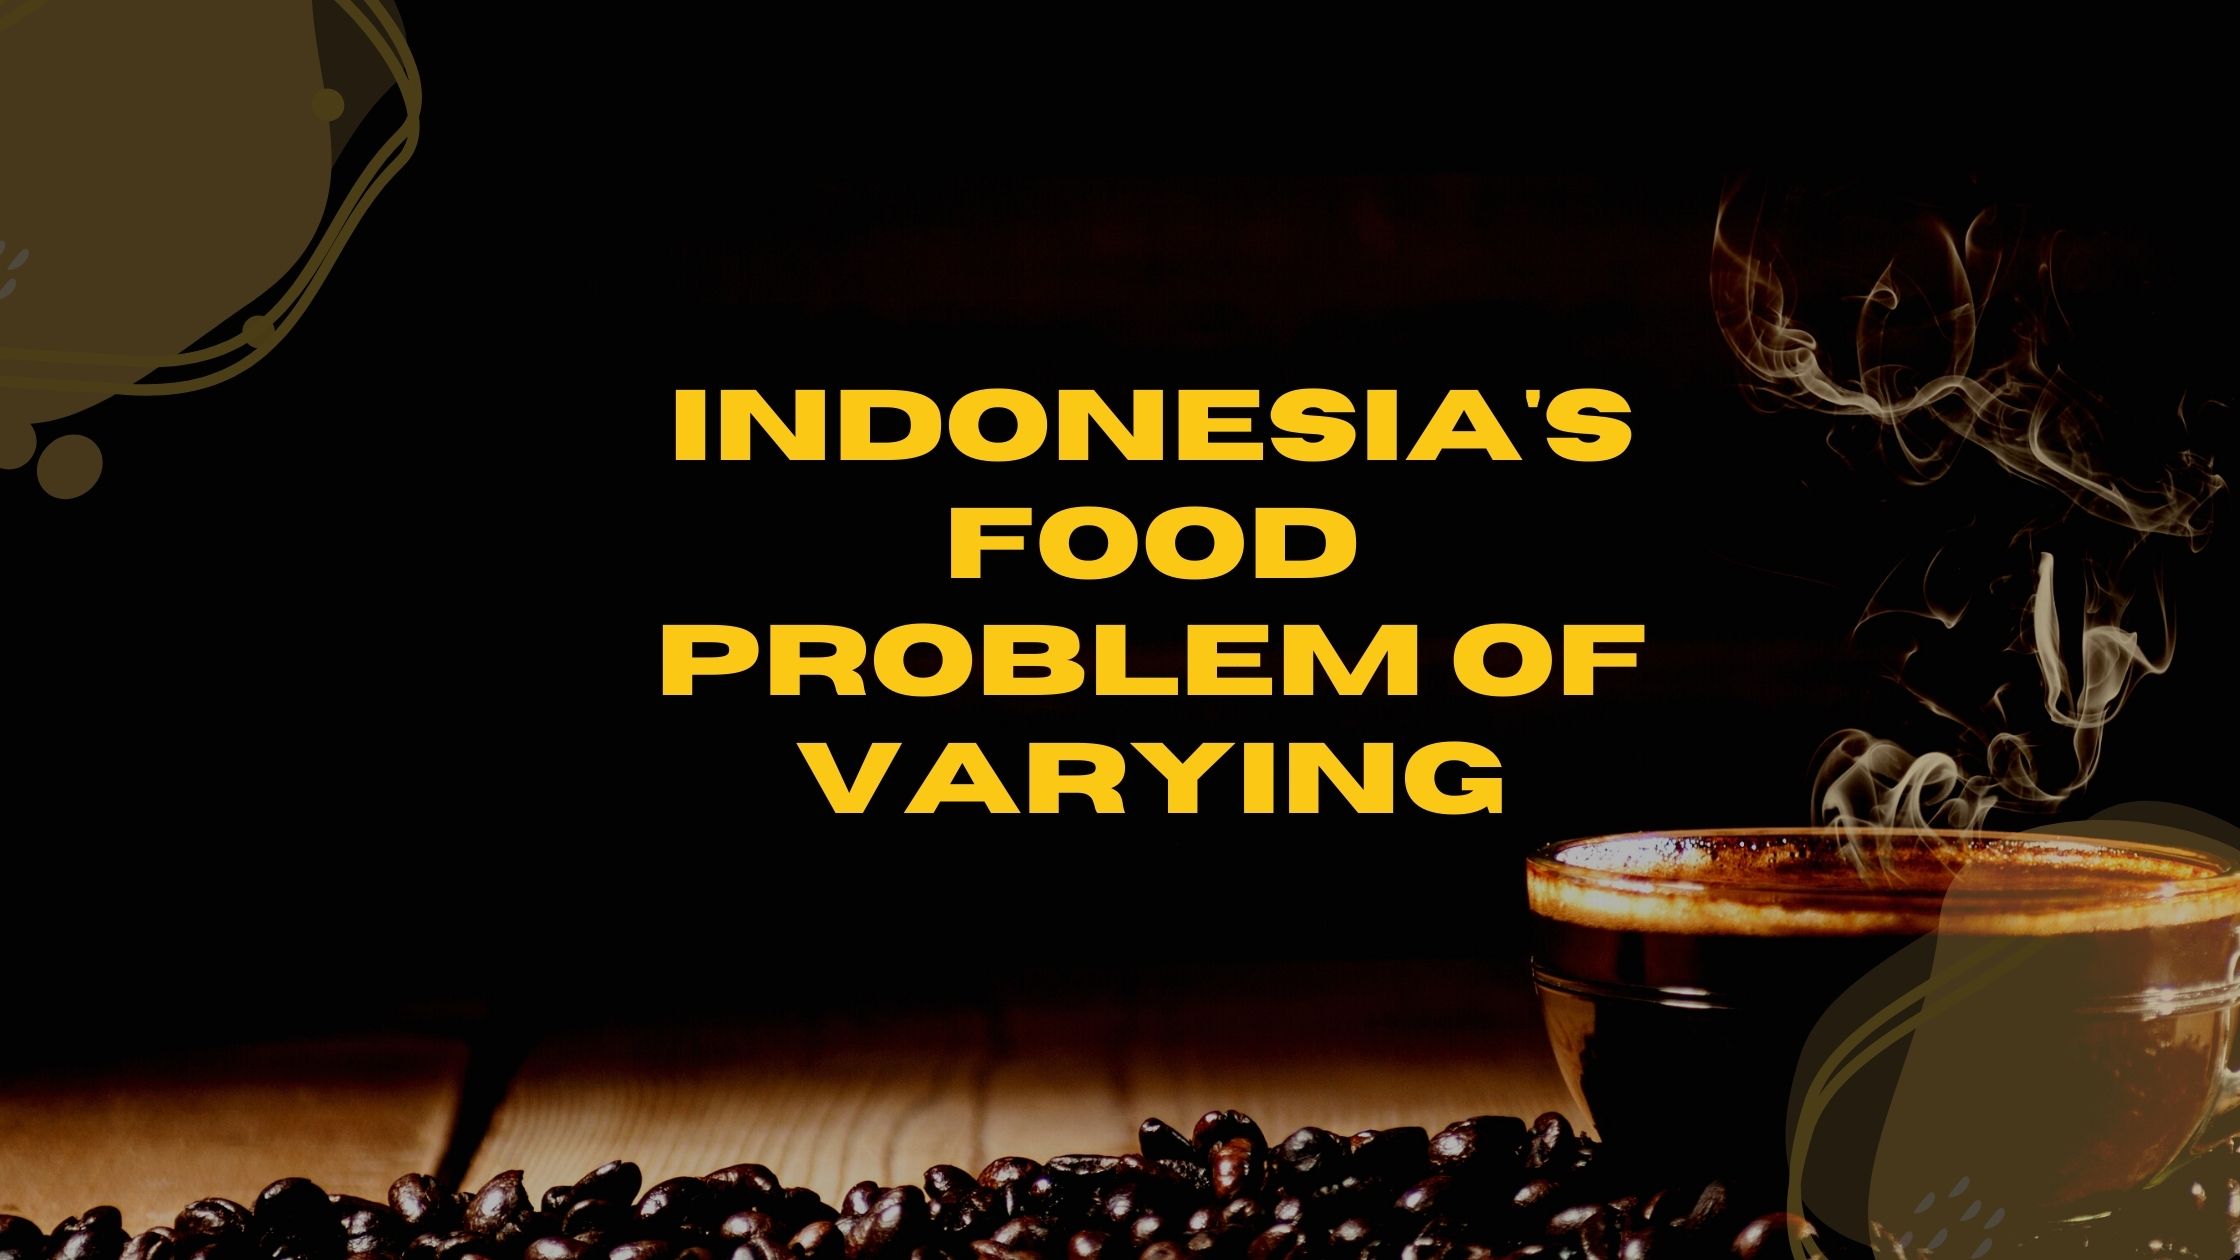 Indonesia's Food Problem of Varying